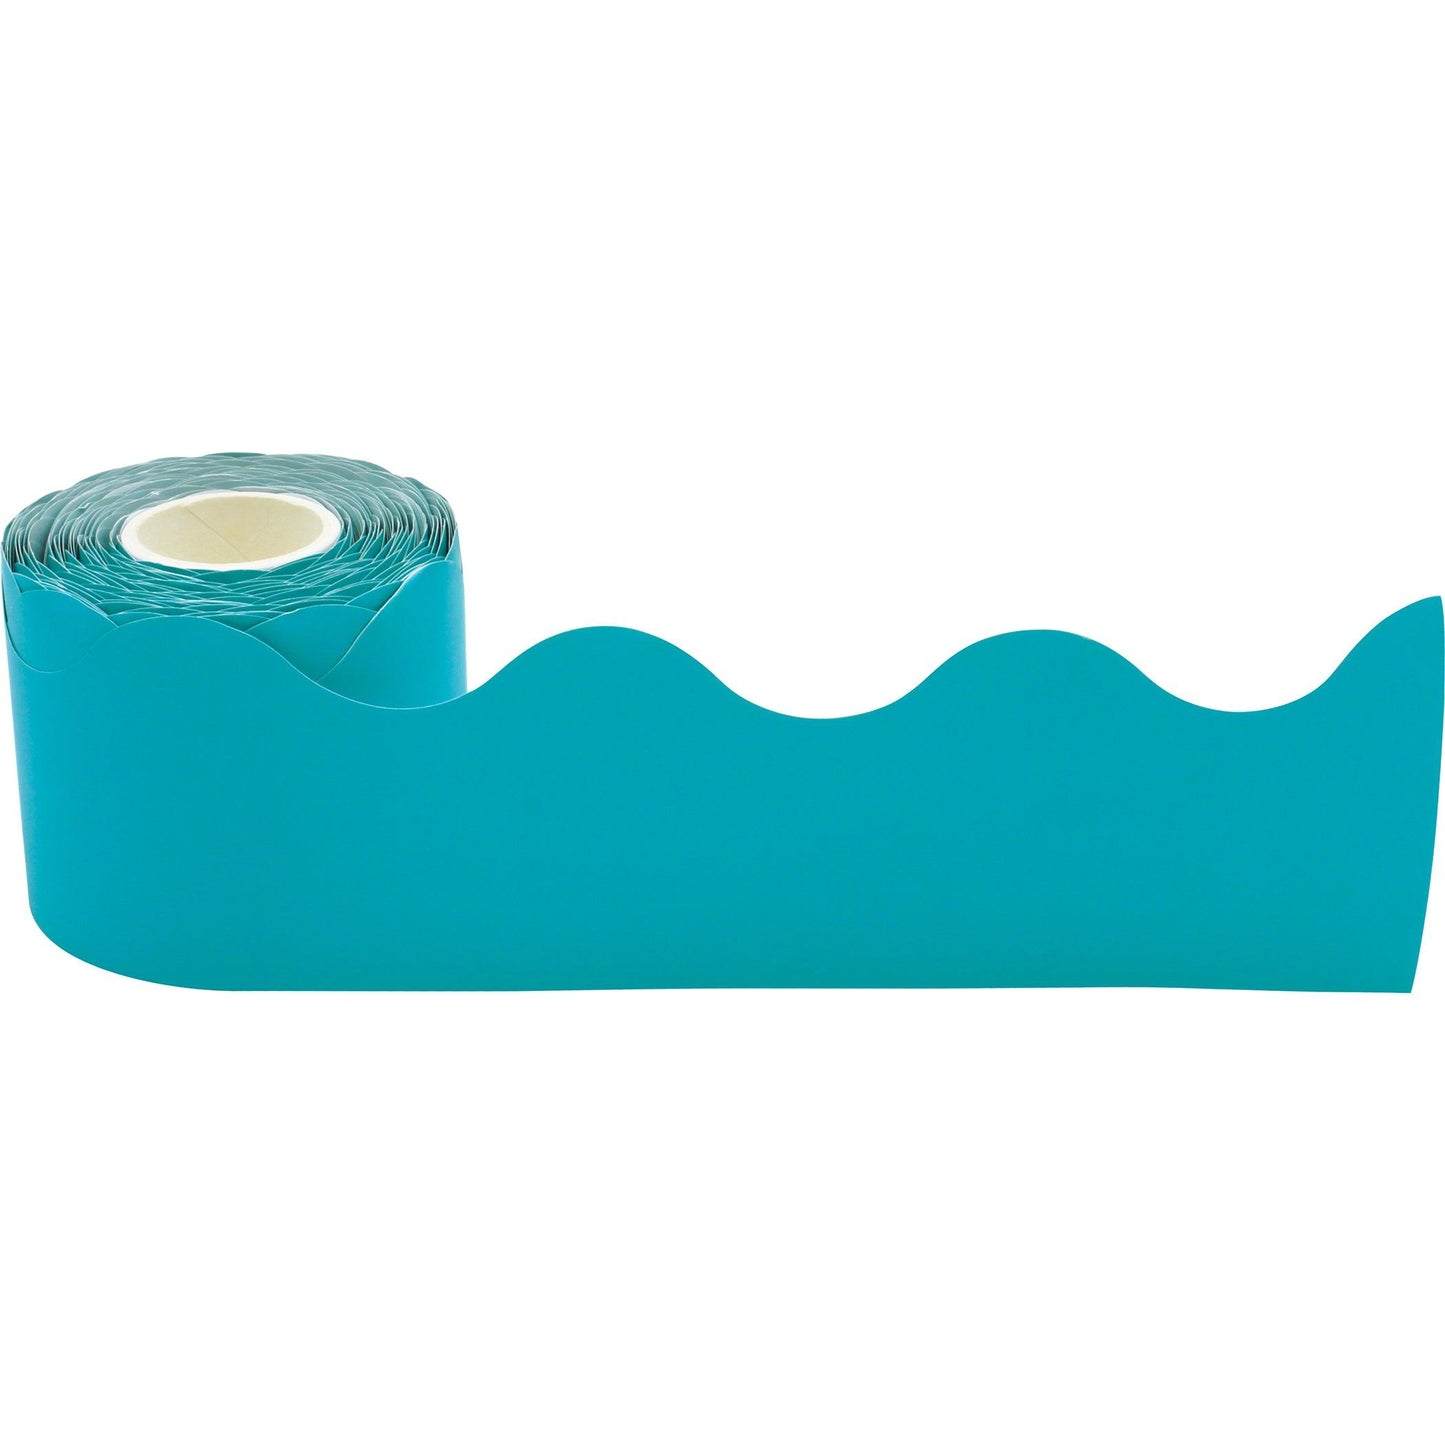 Teal Scalloped Rolled Border Trim, 50 Feet Per Roll, Pack of 3 - Loomini